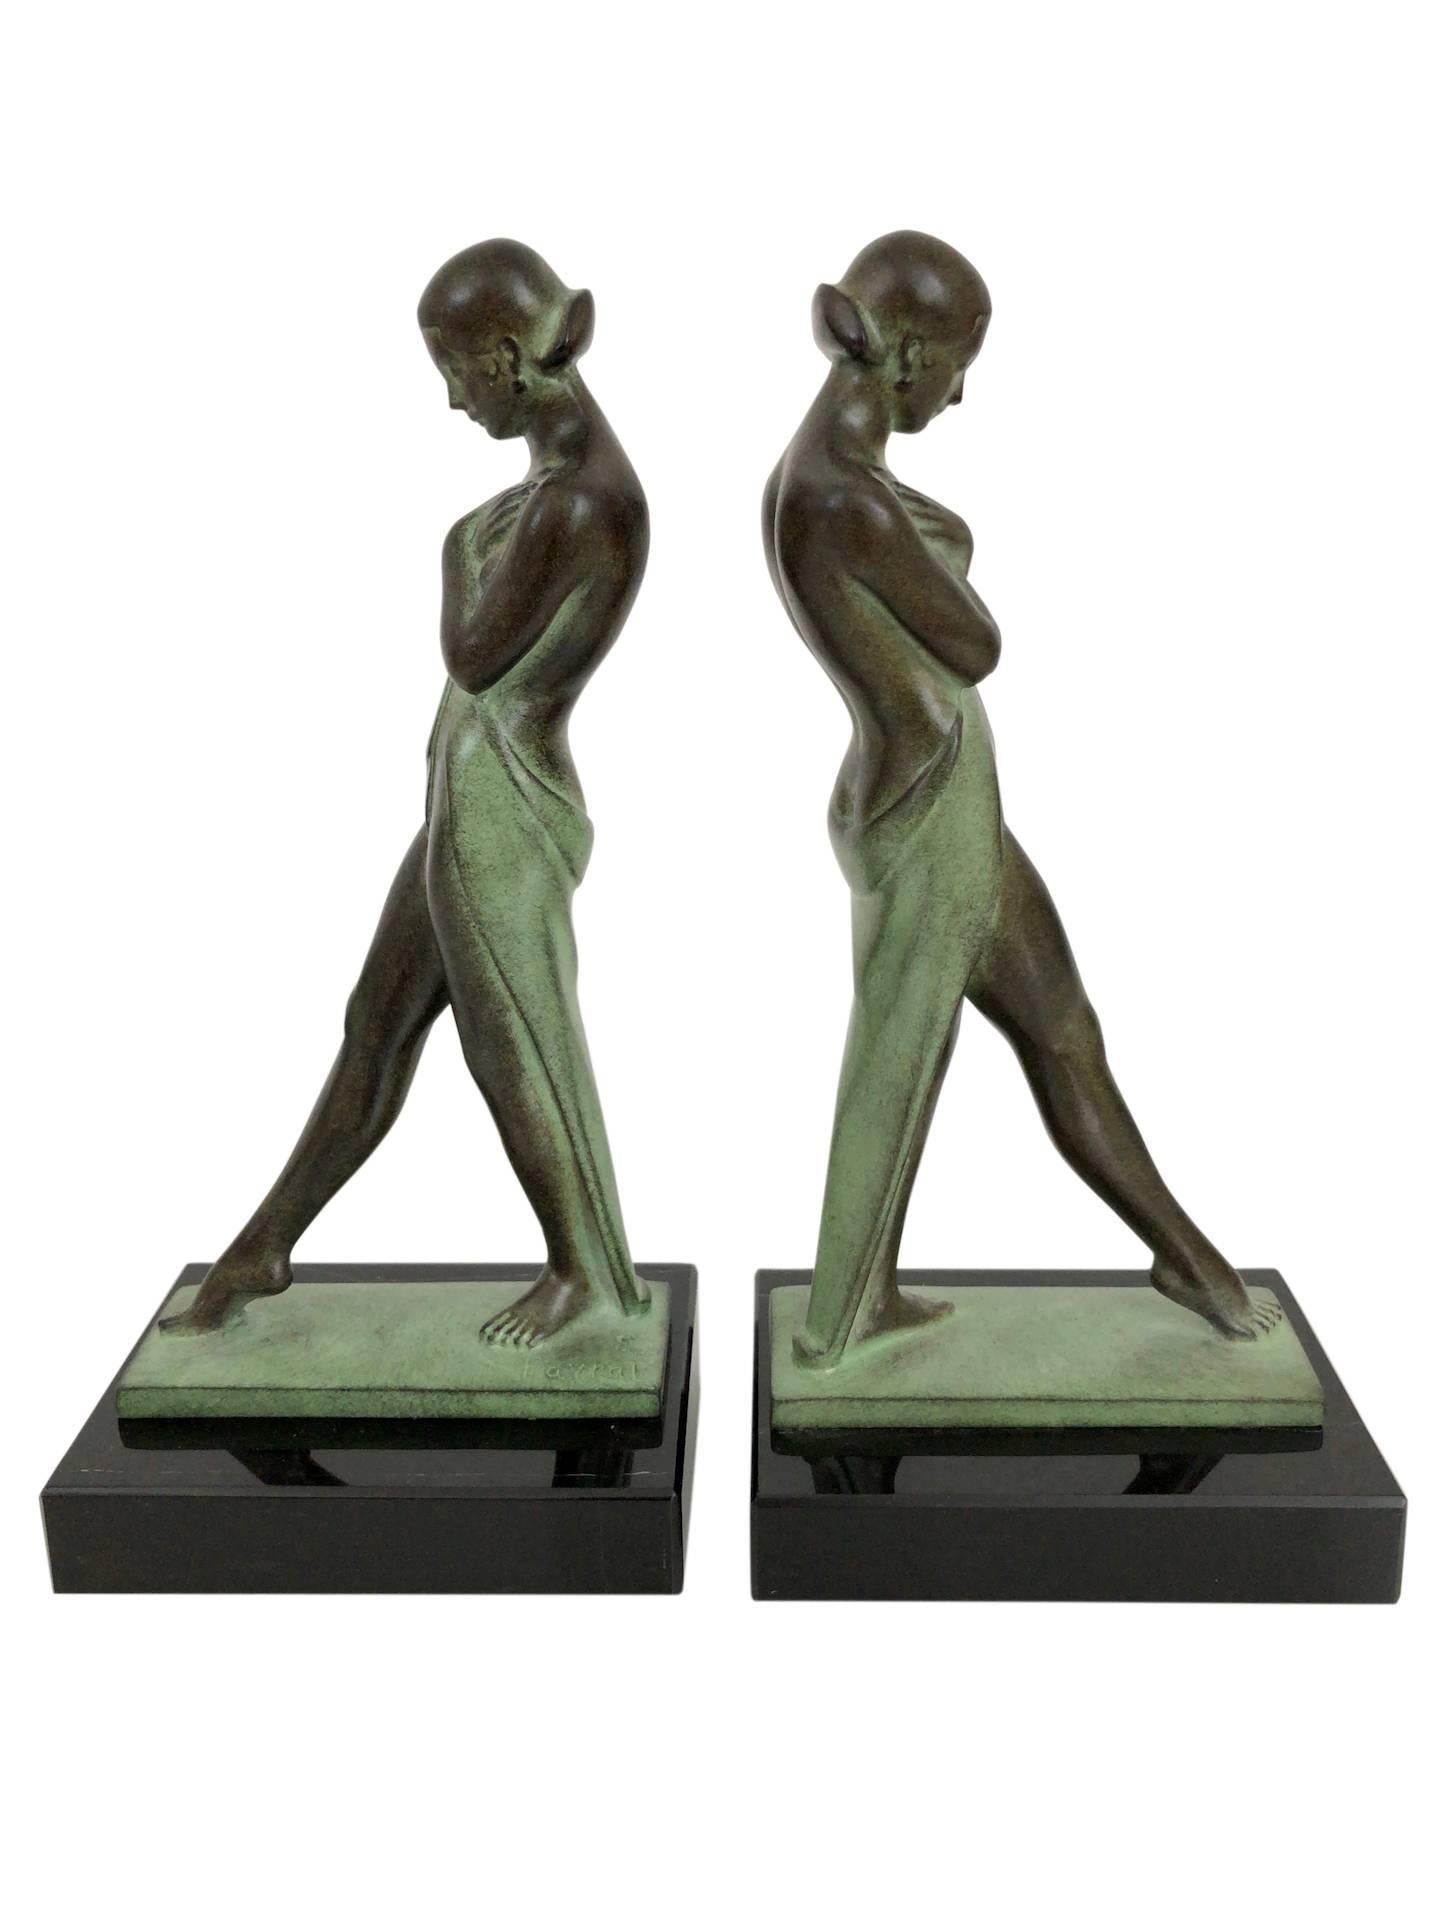 “Meditation”
Designed in France during the roaring 1920s by “Fayral”, which is one of the pseudonyms from “Pierre Le Faguays” (1892-1962), signed
Original “Max Le Verrier”
Art Deco style, France 

Bookends made in “Régule” (spelter)
Socle in